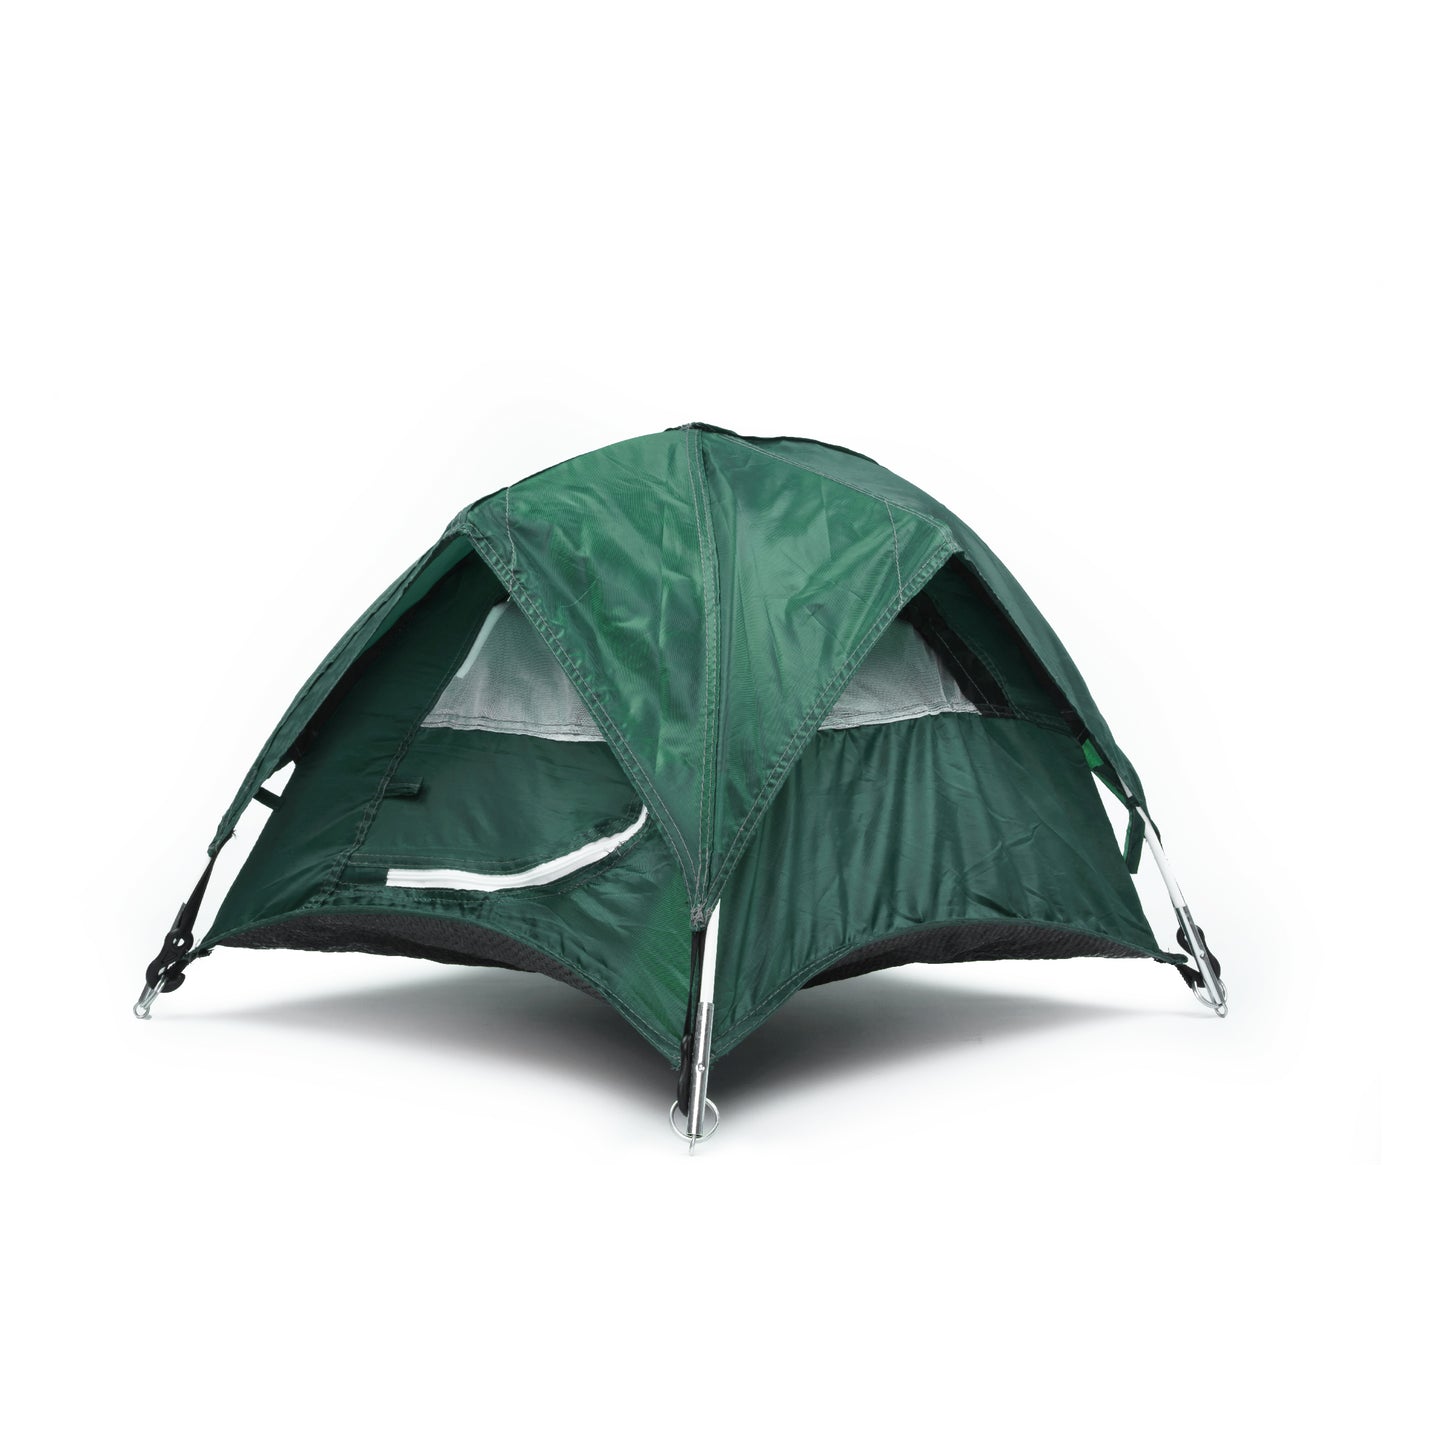 green tiny tent on a white background shown in three quarter view.